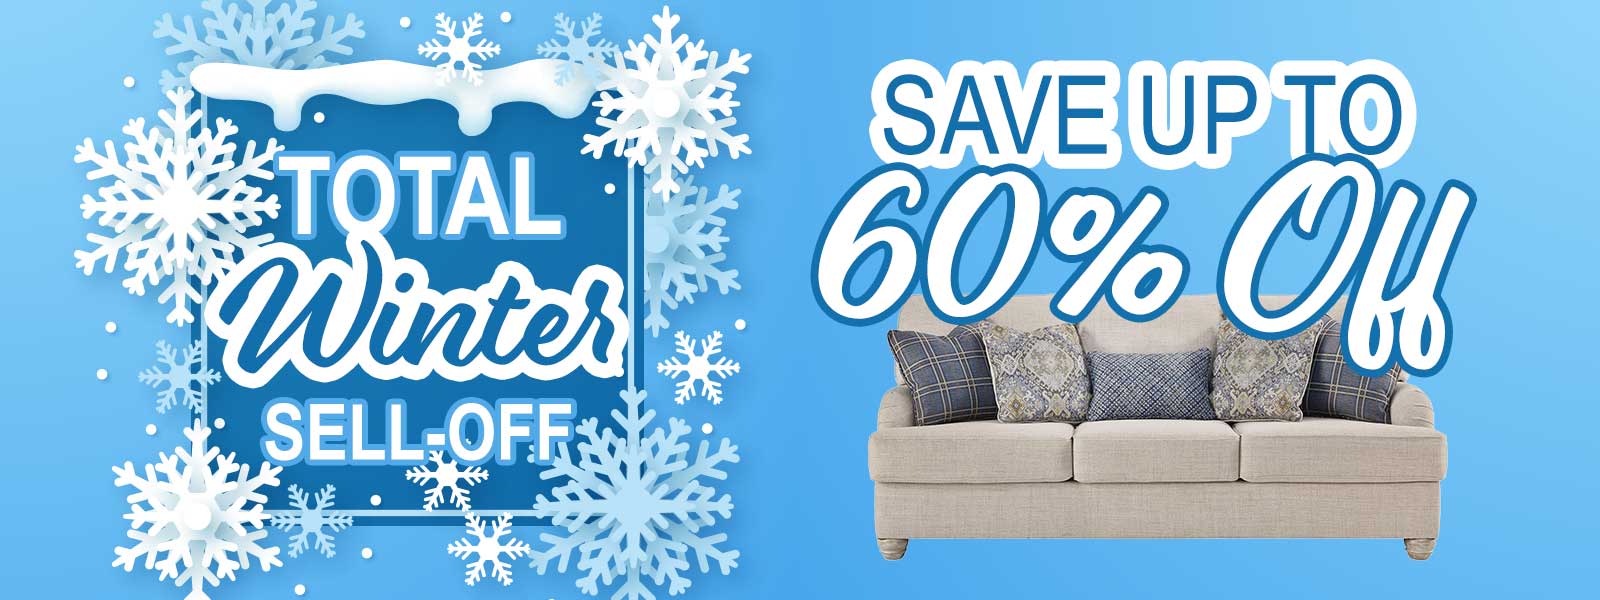 Winter Sell Off Roberts - Save Up to 60% off